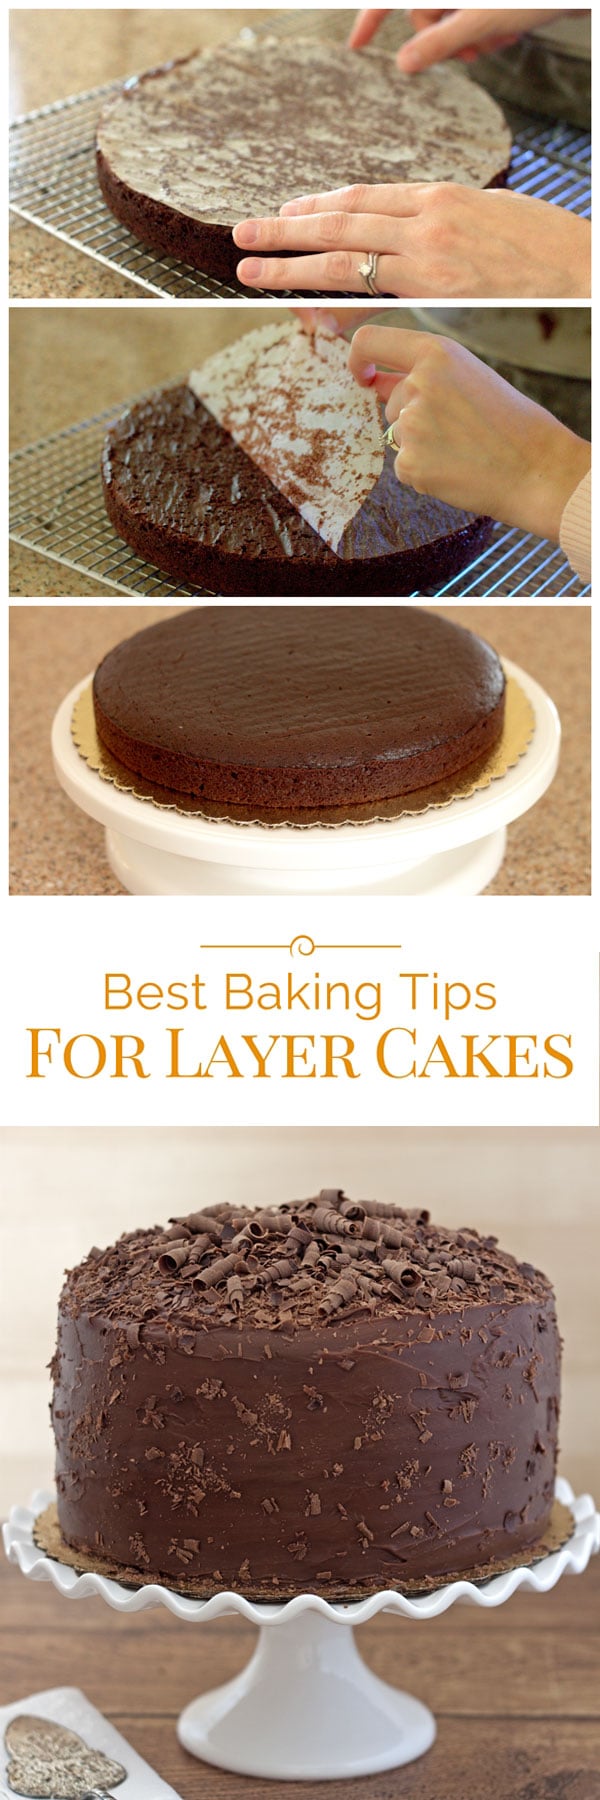 Collage of Best Baking Tips for Layer Cakes